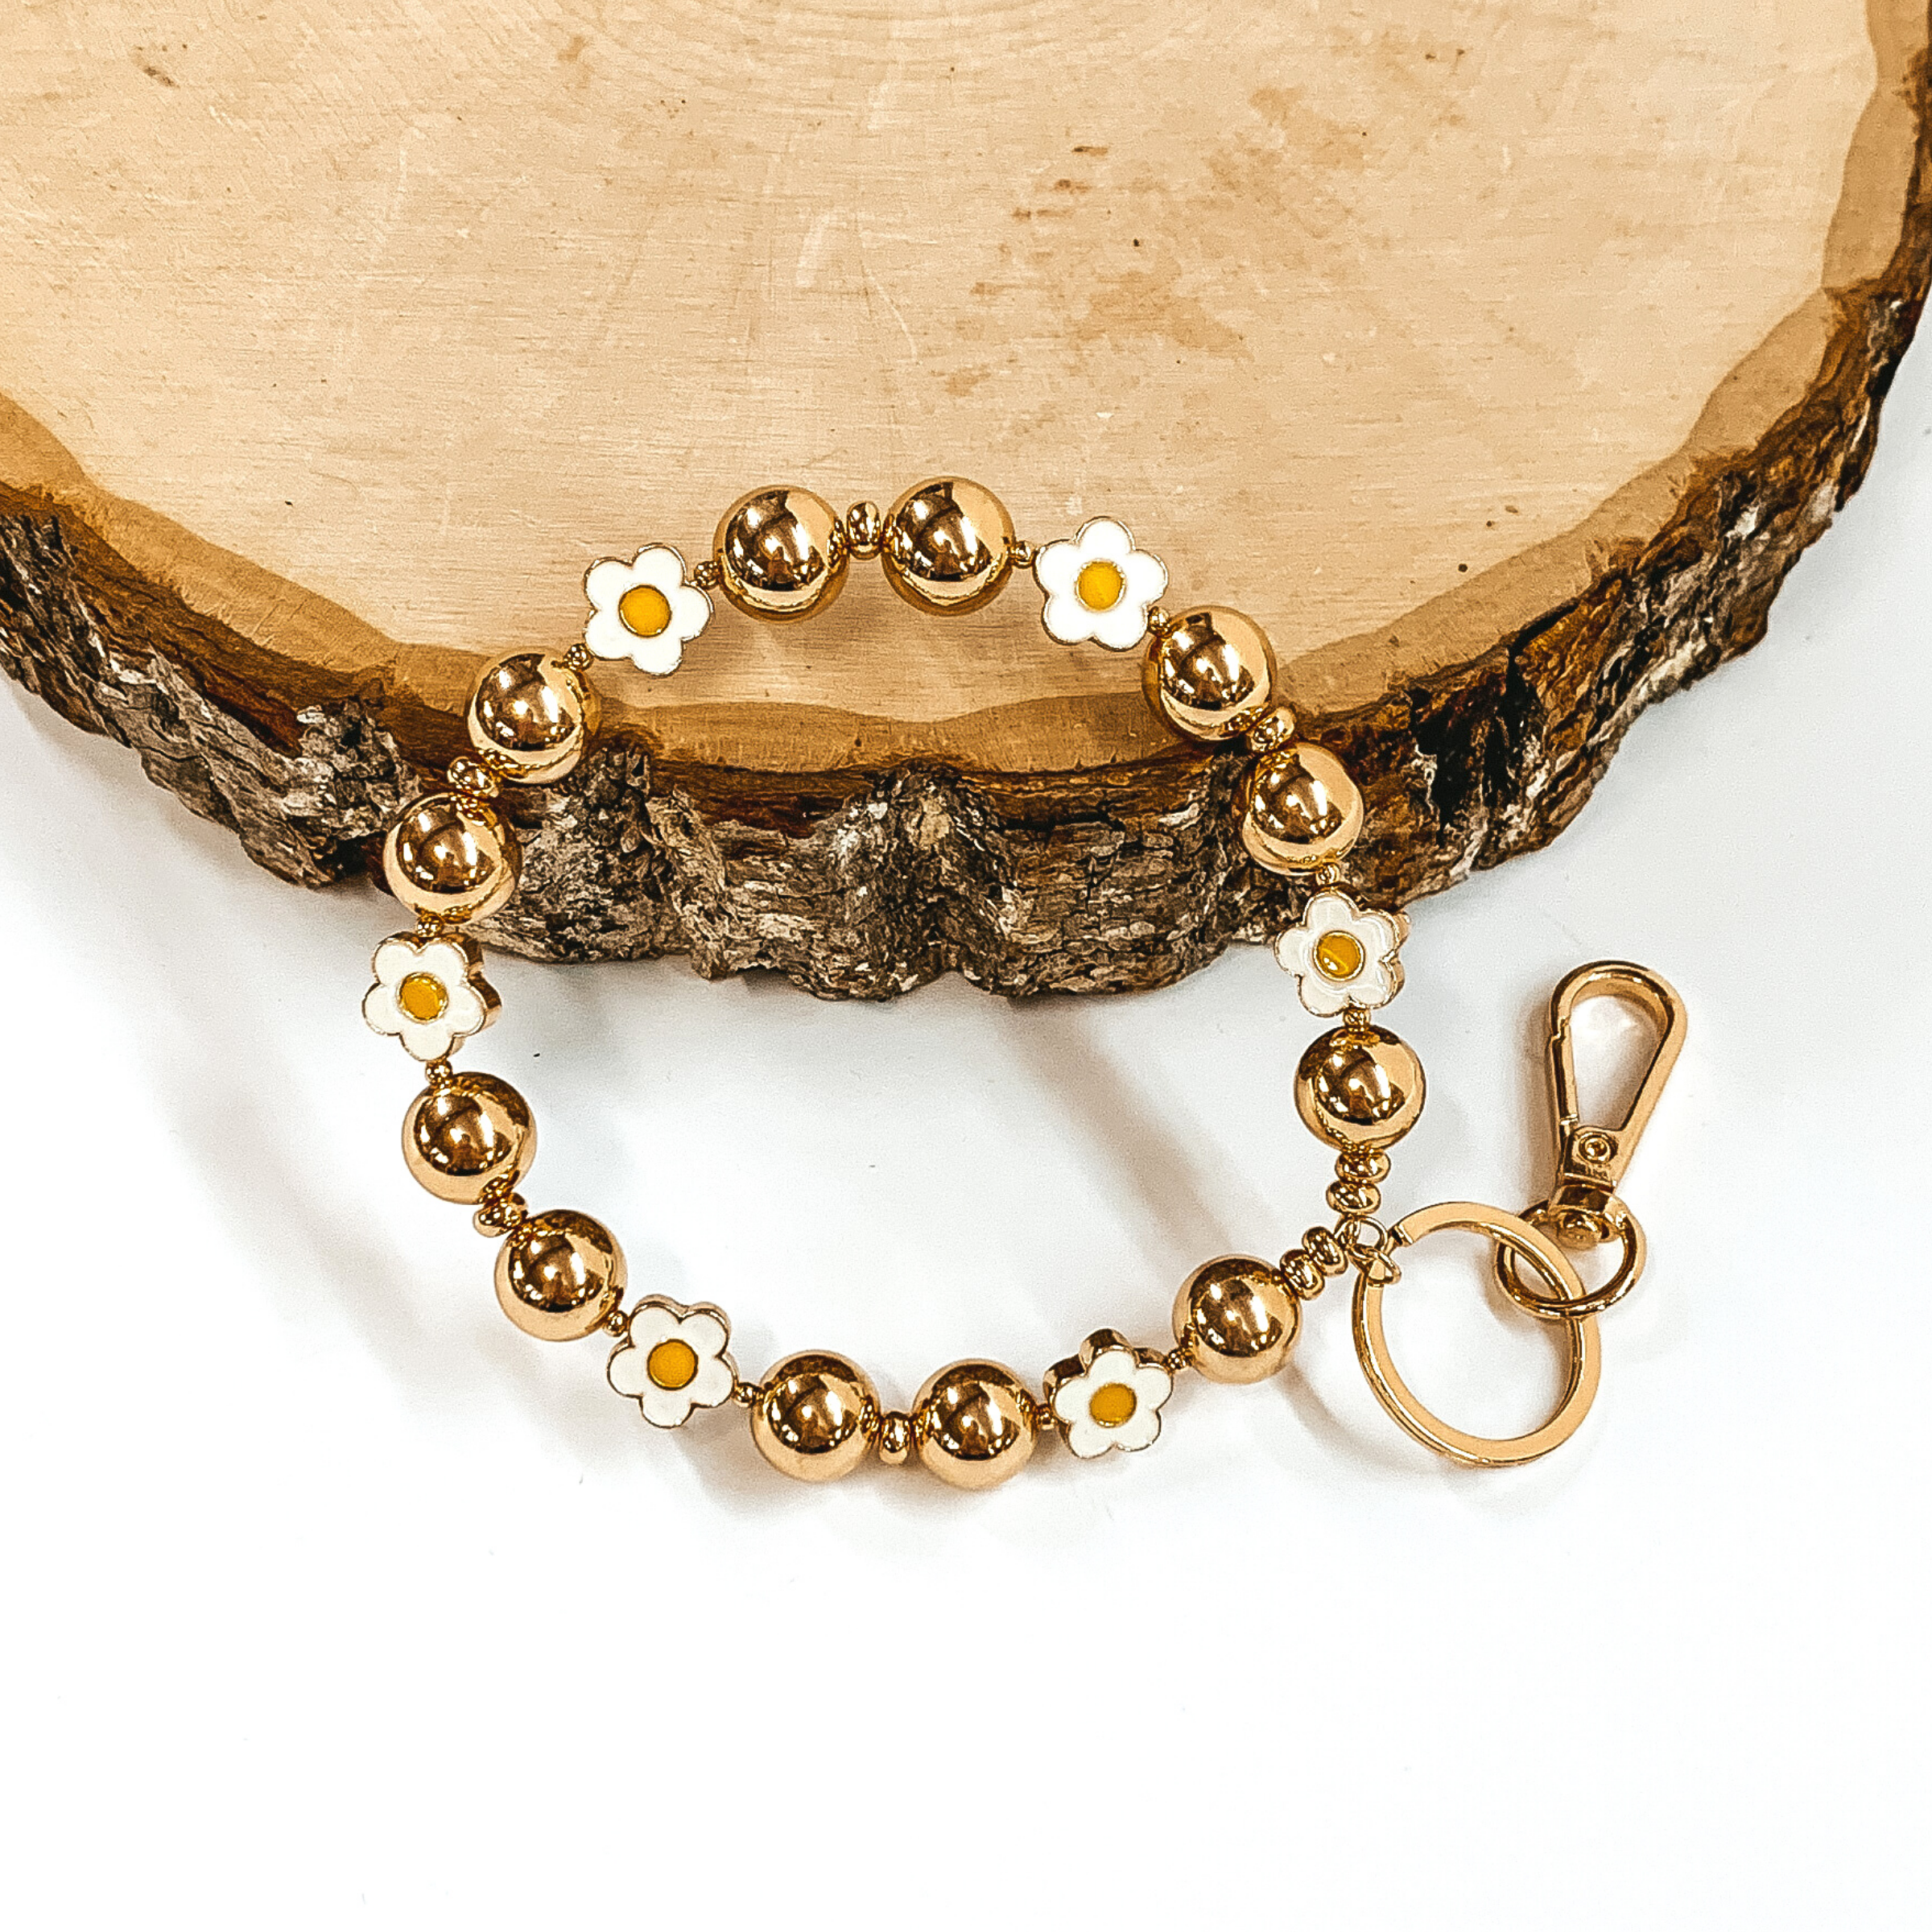 Gold beaded bracelet with white flower spacers. There is a gold key ring and clasp on one end of the bangle. It is pictured laying against a piece of wood on a white background.